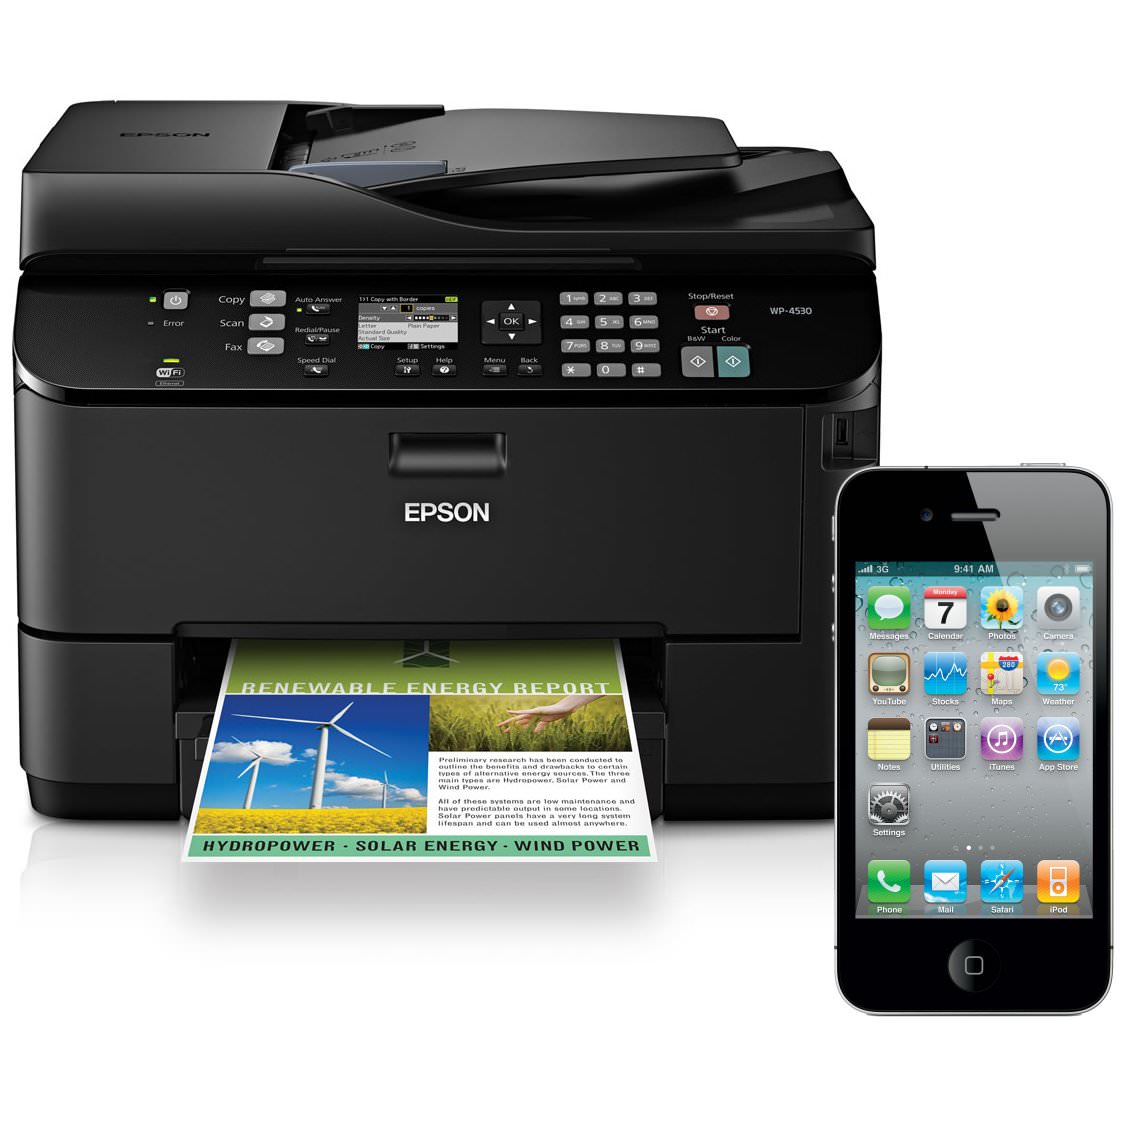 Best Printer for Printing Company